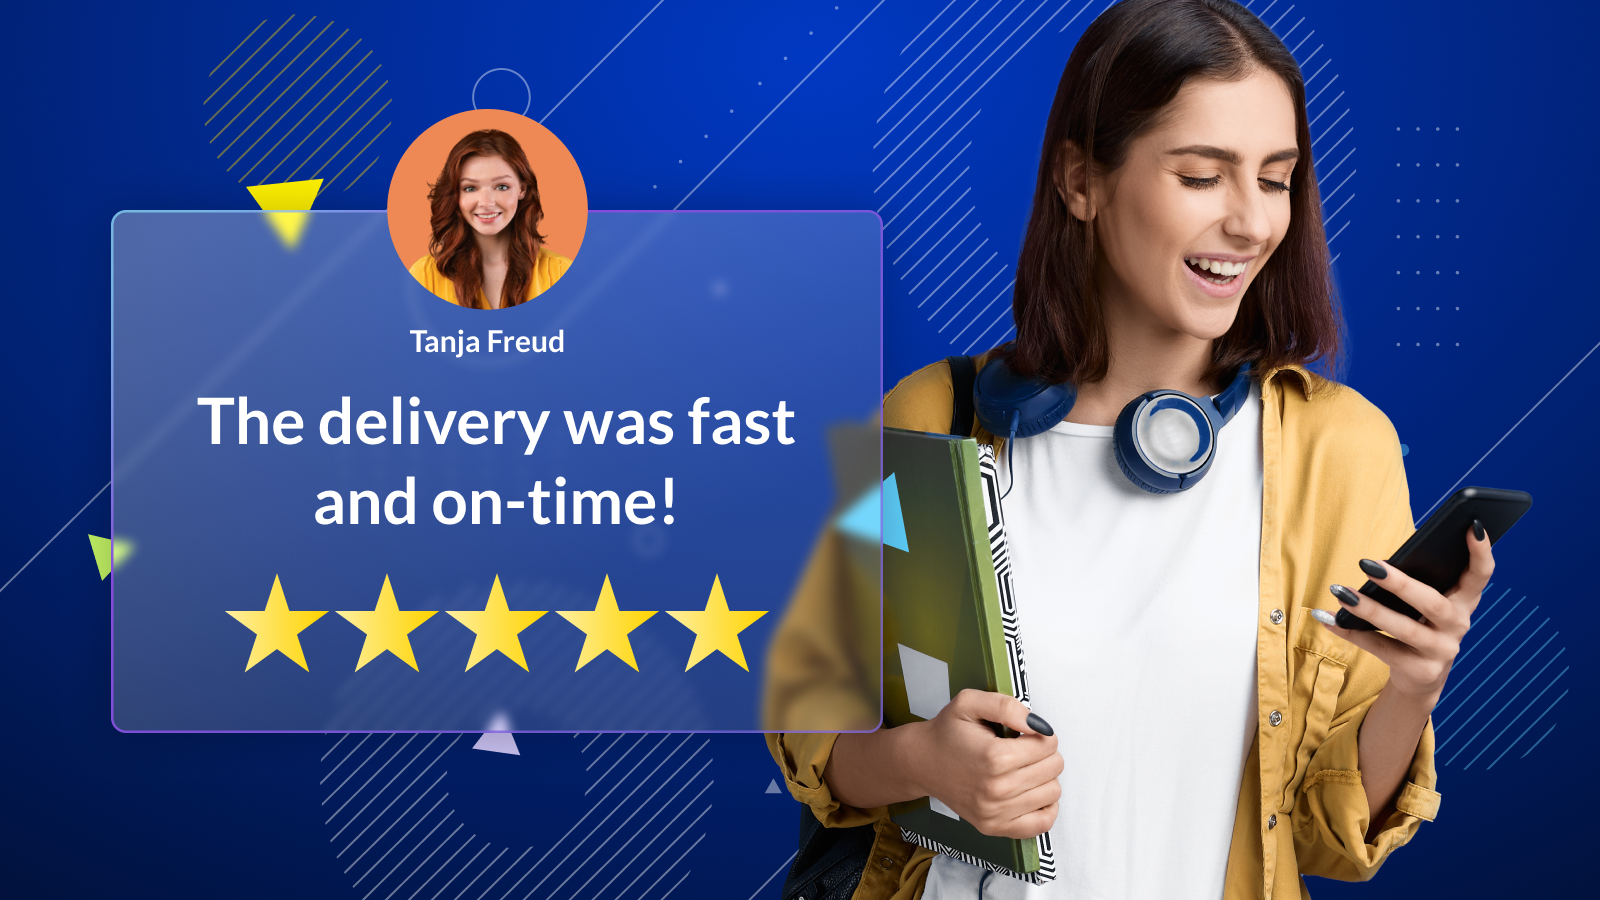 5 star rating for the delivery being fast and on time - carrier scorecard